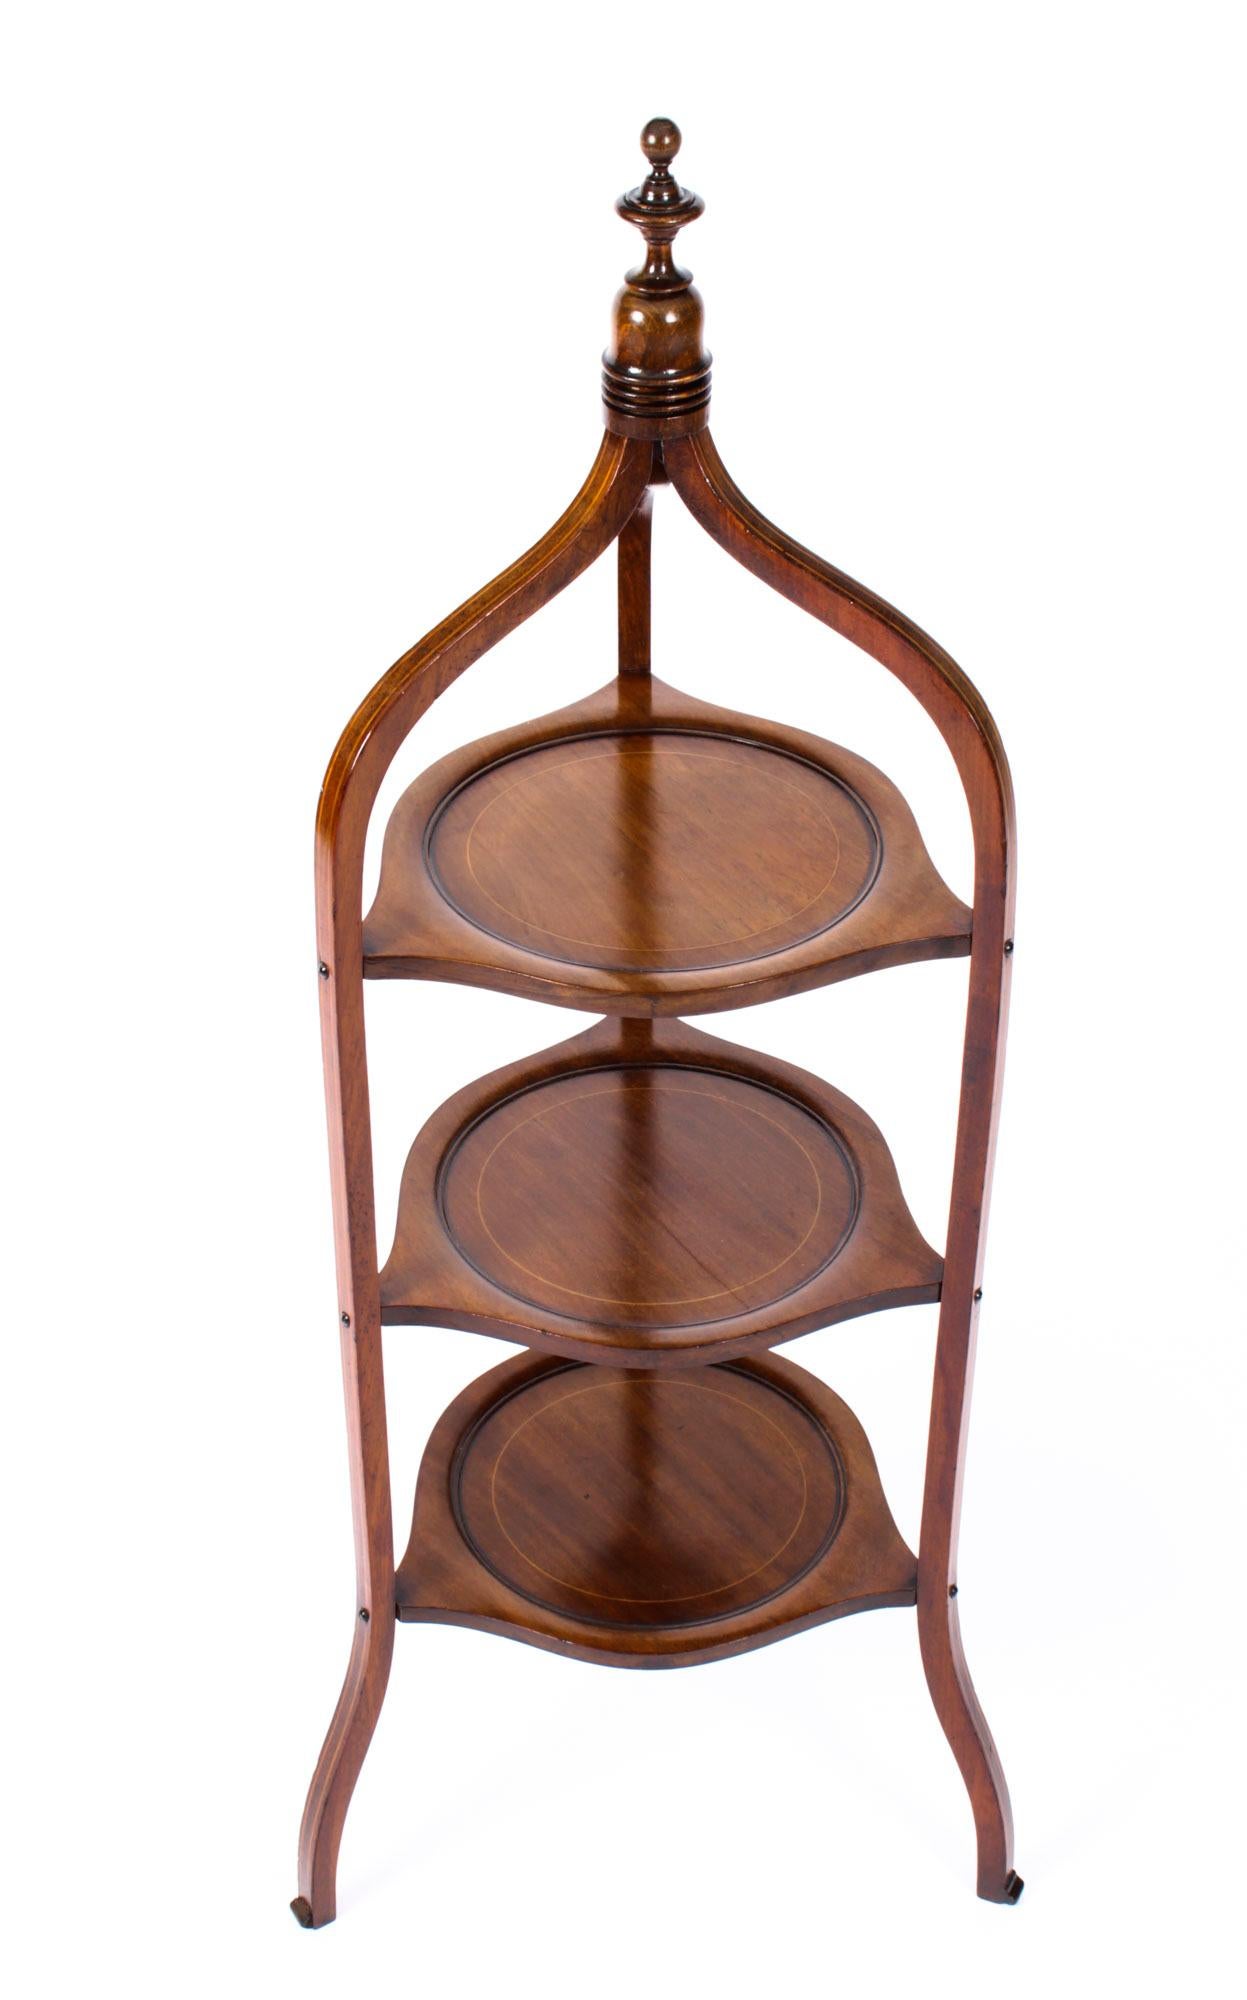 This is a beautiful antique Edwardian three tier mahogany cake stand, circa 1900.

The stand is exquisitely crafted in mahogany, is surmounted by an elegant turned finial, has three shaped uprights with three dished tiers, and features boxwood